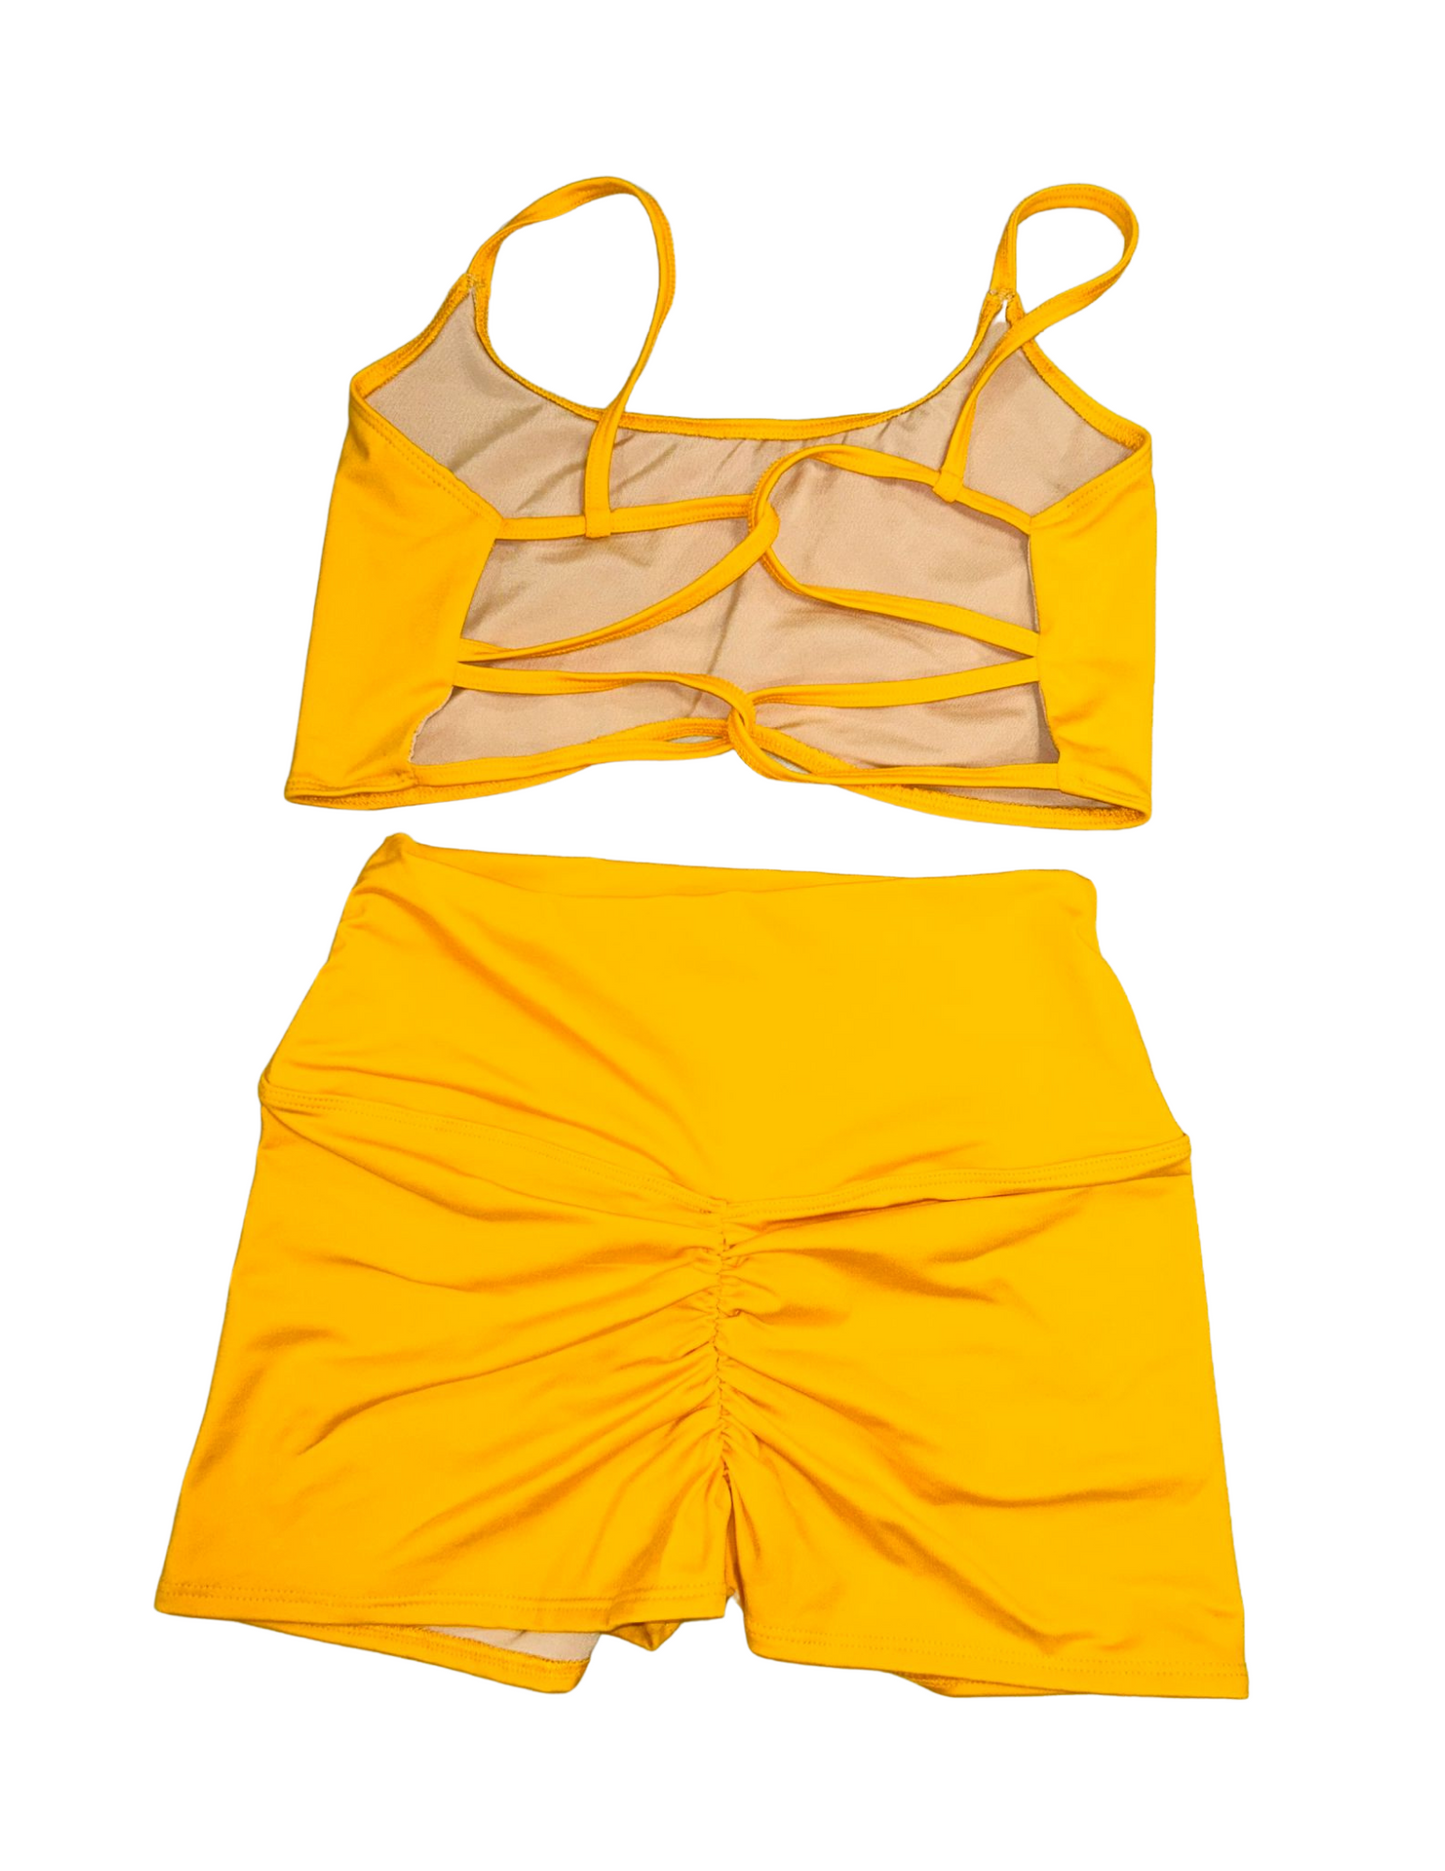 Everyday Top + Lux Short Set - Ready To Ship - FINAL SALE